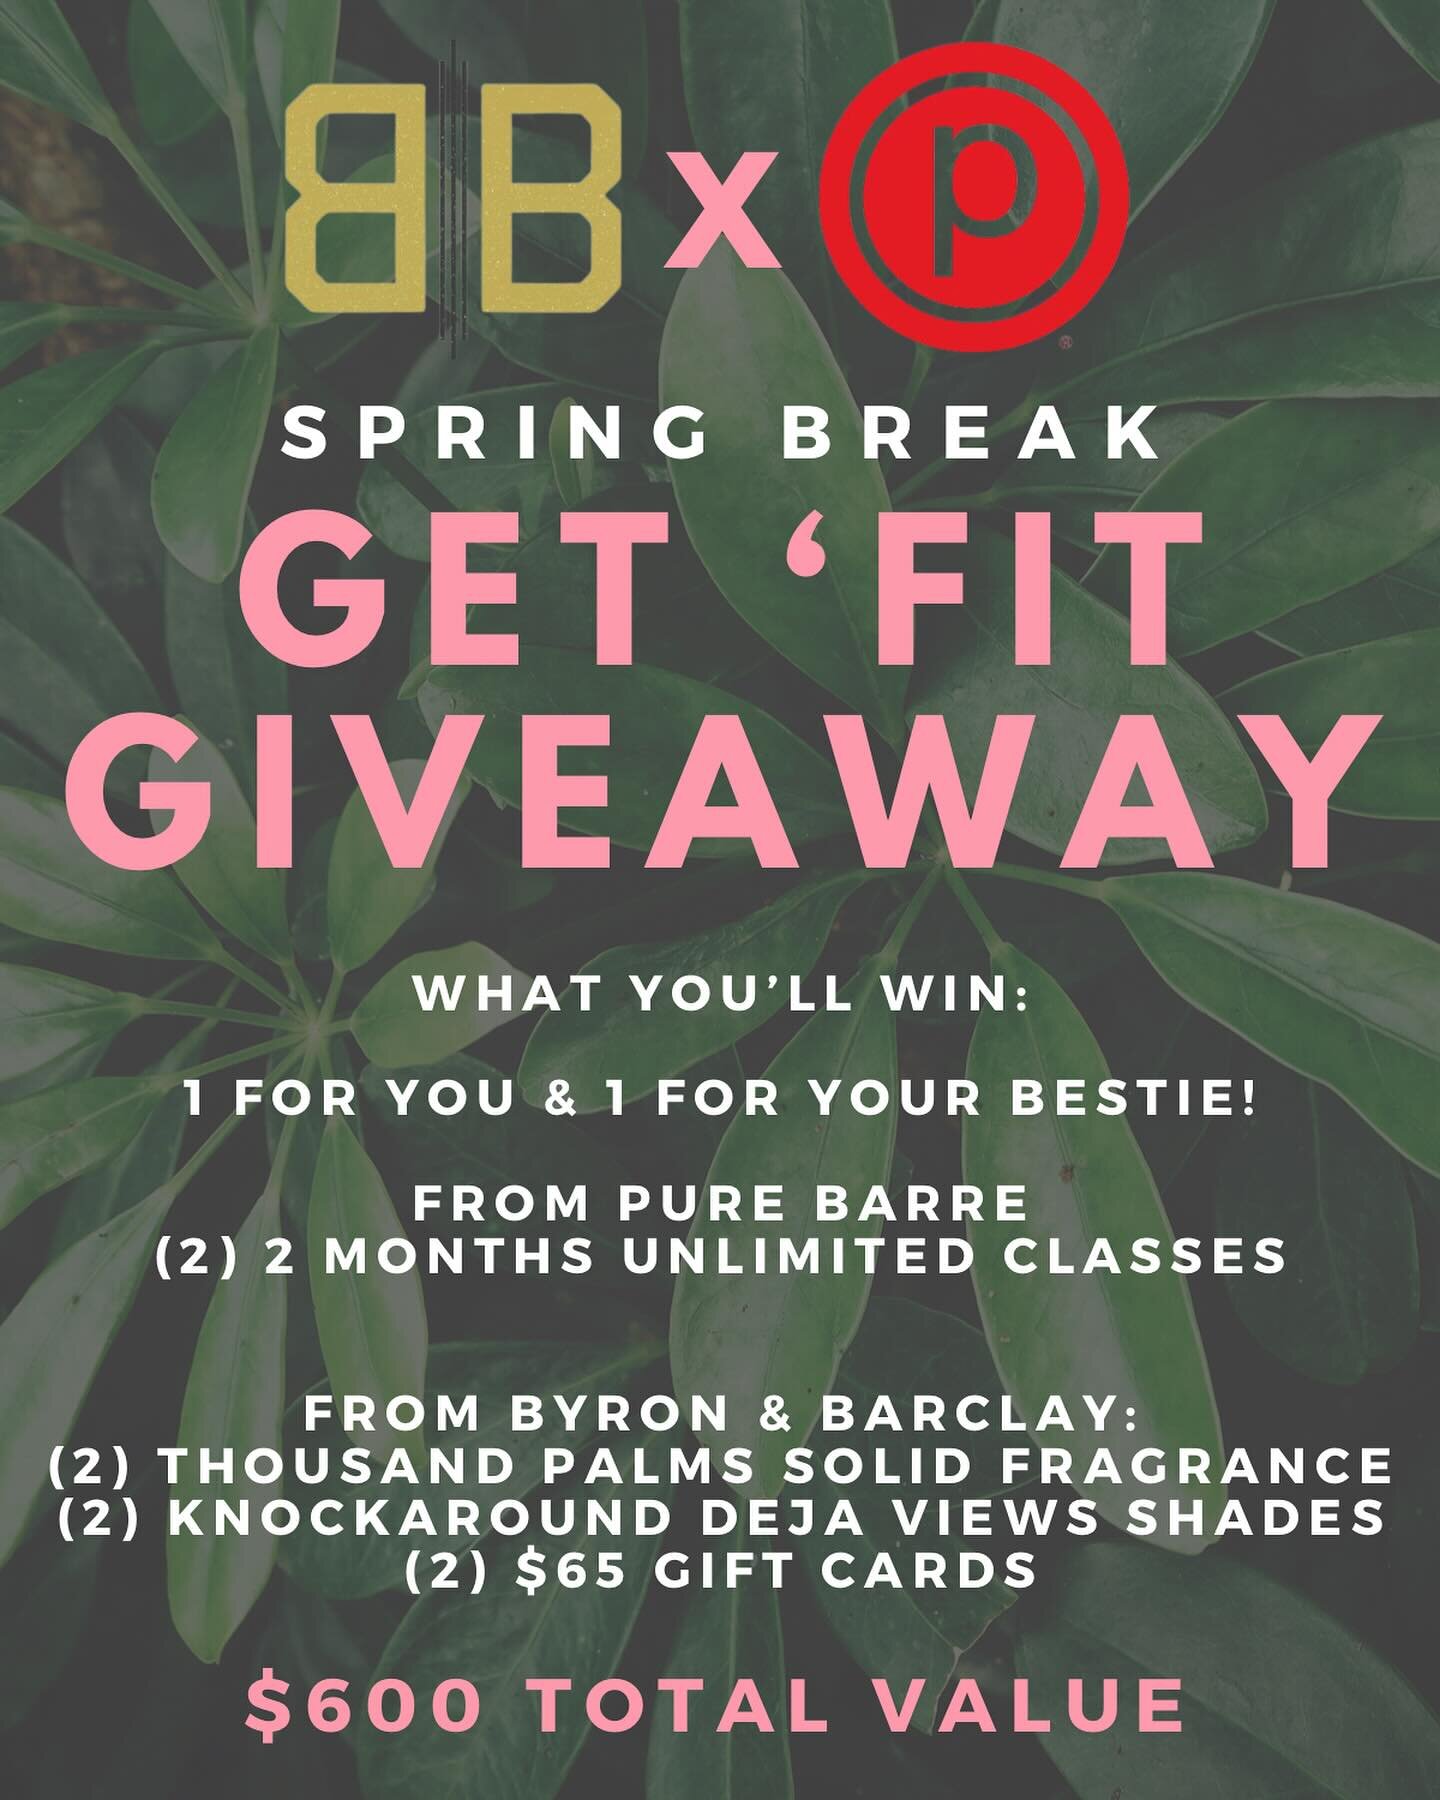 🎀 Spring Break Get &lsquo;Fit Giveaway 🎀
Get fit @purebarreowensboro, then get your new &lsquo;fit @byronandbarclay before heading to Spring Break!
To enter: 
&bull;Follow @purebarreowensboro &amp; @byronandbarclay
&bull;Tag your besties that you&r